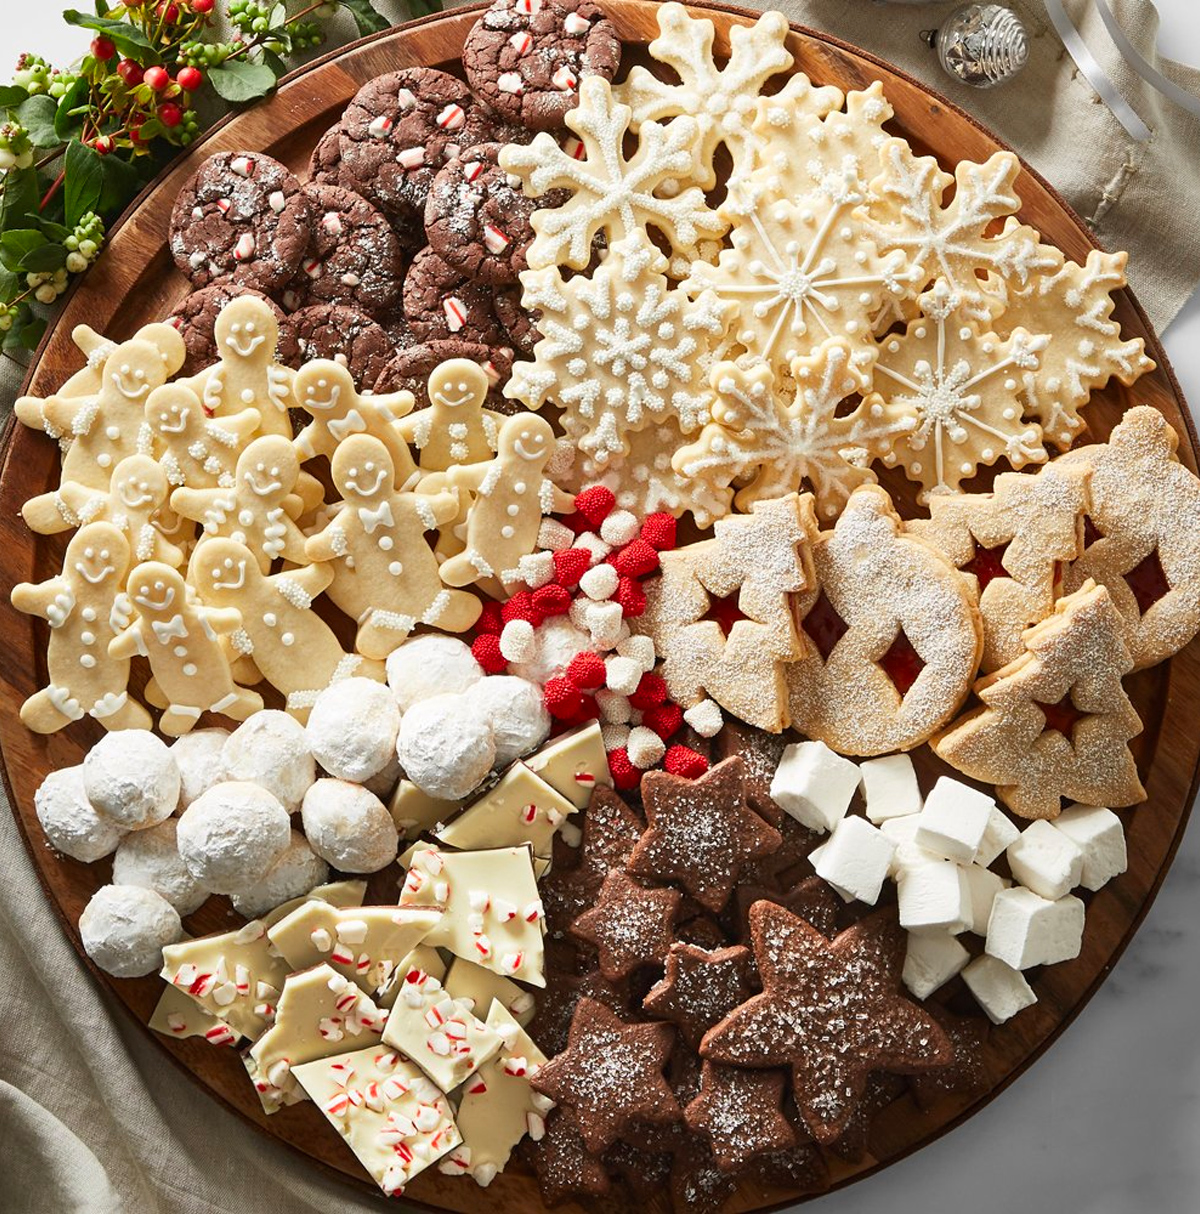 Williams Sonoma's cookie board is filled with cookies and sweet treats.